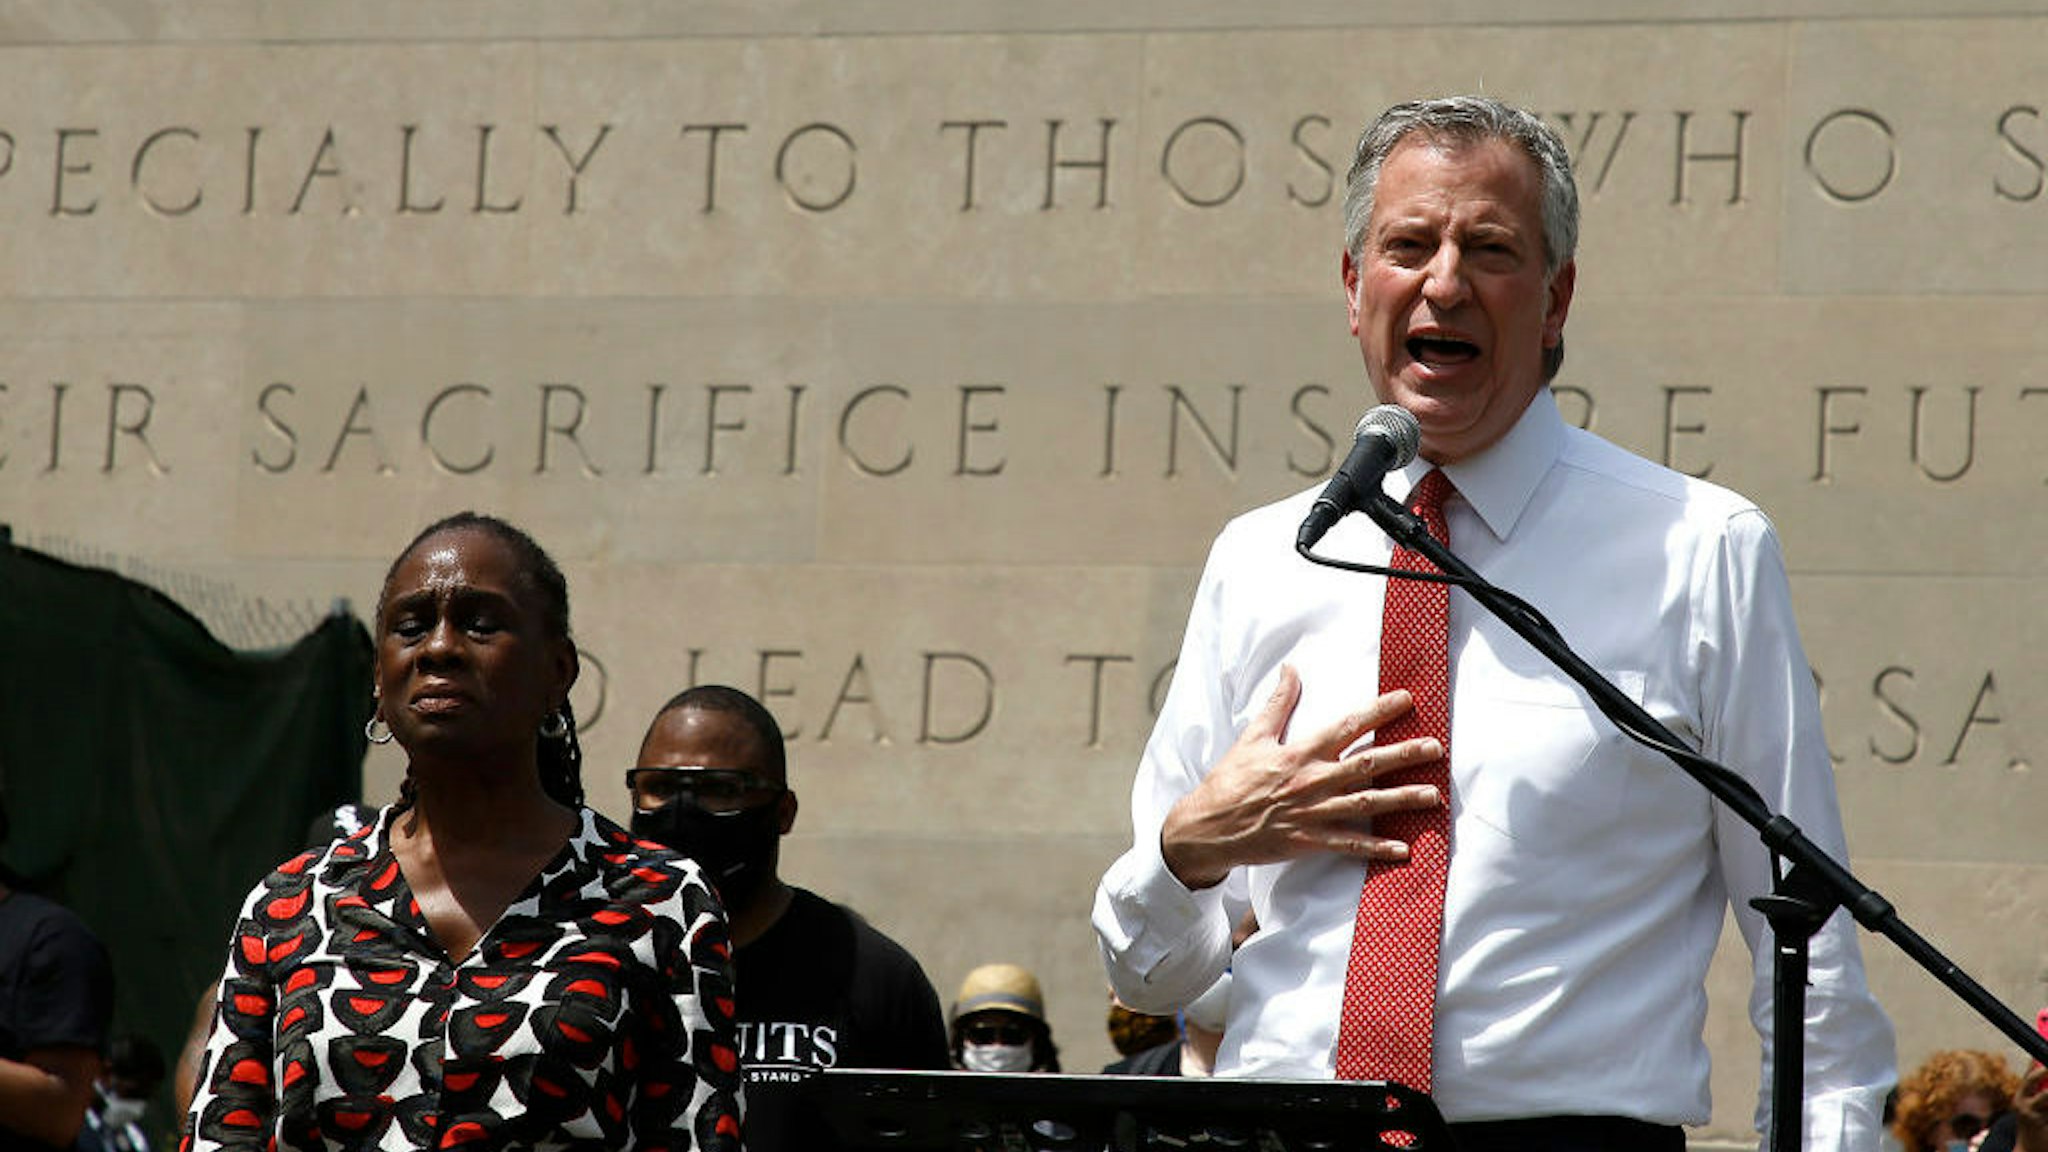 New York Mayor Bill de Blasio speaks to an estimated 10,000 people as they gather in Brooklyns Cadman Plaza Park for a memorial service for George Floyd, the man killed by a Minneapolis police officer on June 04, 2020 in New York City. Floyds brother, Terrence, local politicians and civic and religious leaders also attended the event before marching over the Brooklyn Bridge. (Photo by John Lamparski/NurPhoto via Getty Images)